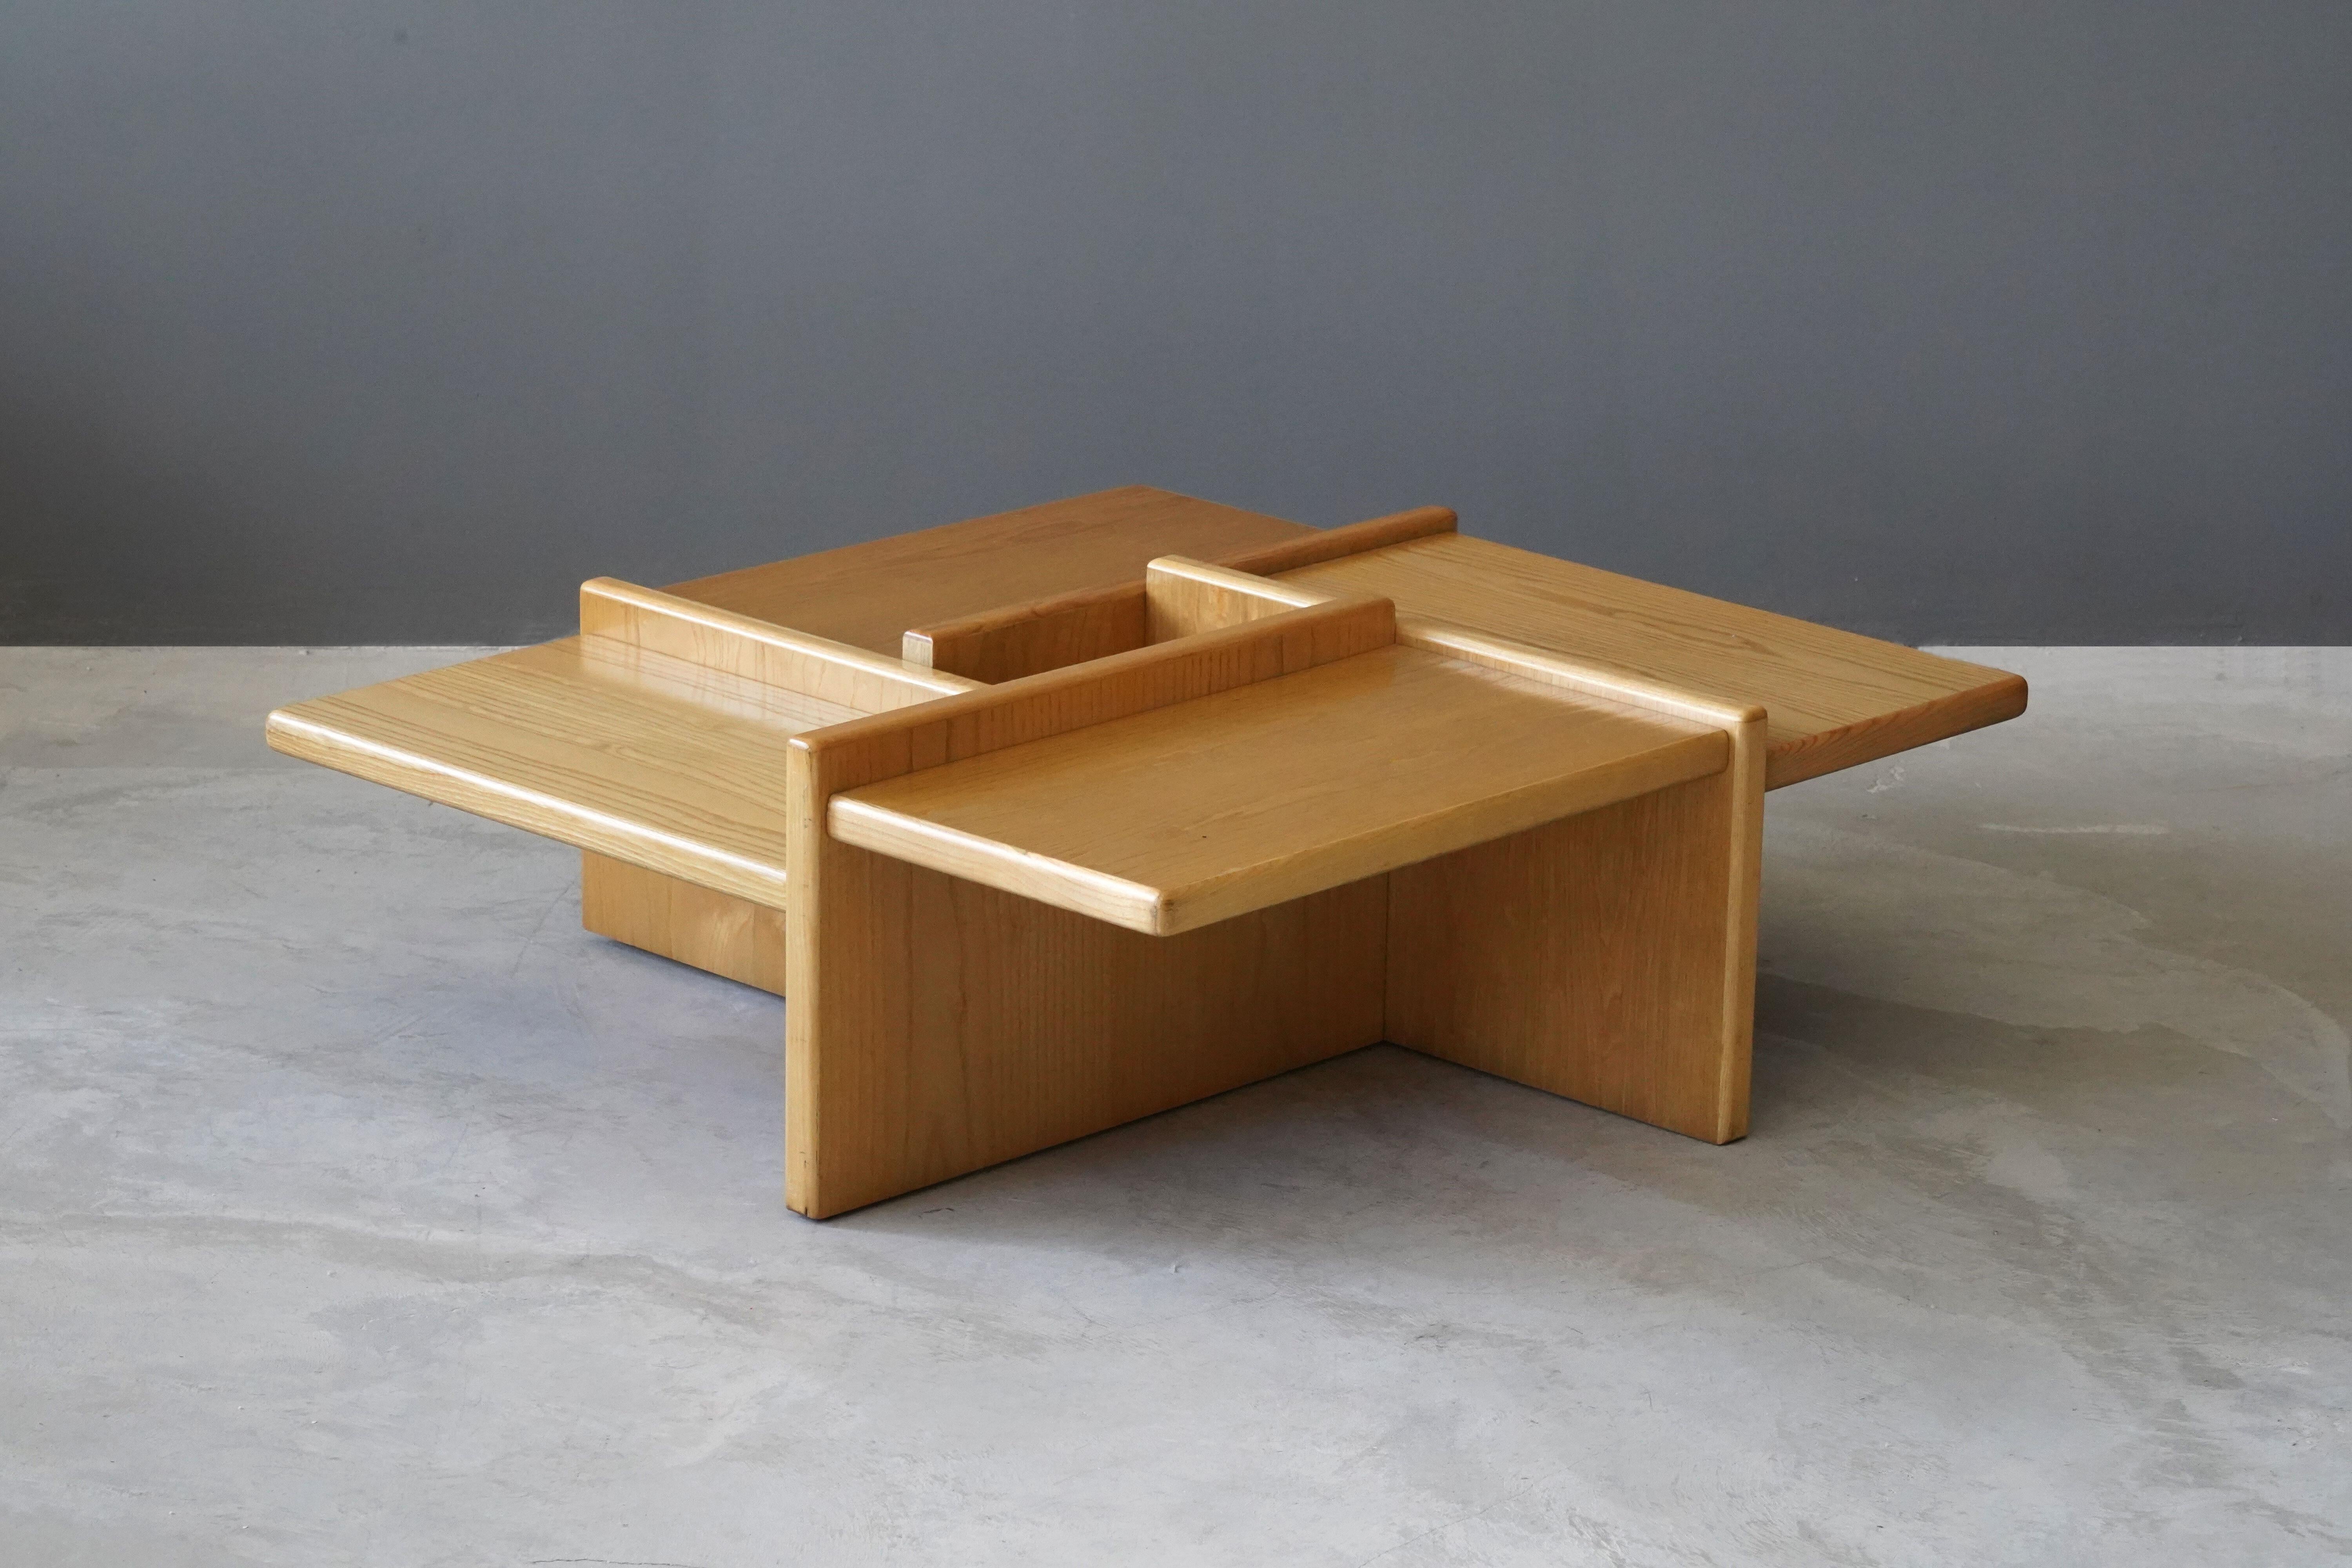 A minimalist coffee / cocktail table. Designed and produced in Italy, 1970s. In solid oak.

Other designers of the period include Franco Albini, Mario Bellini, Donald Judd, Scott Burton, Charlotte Perriand..